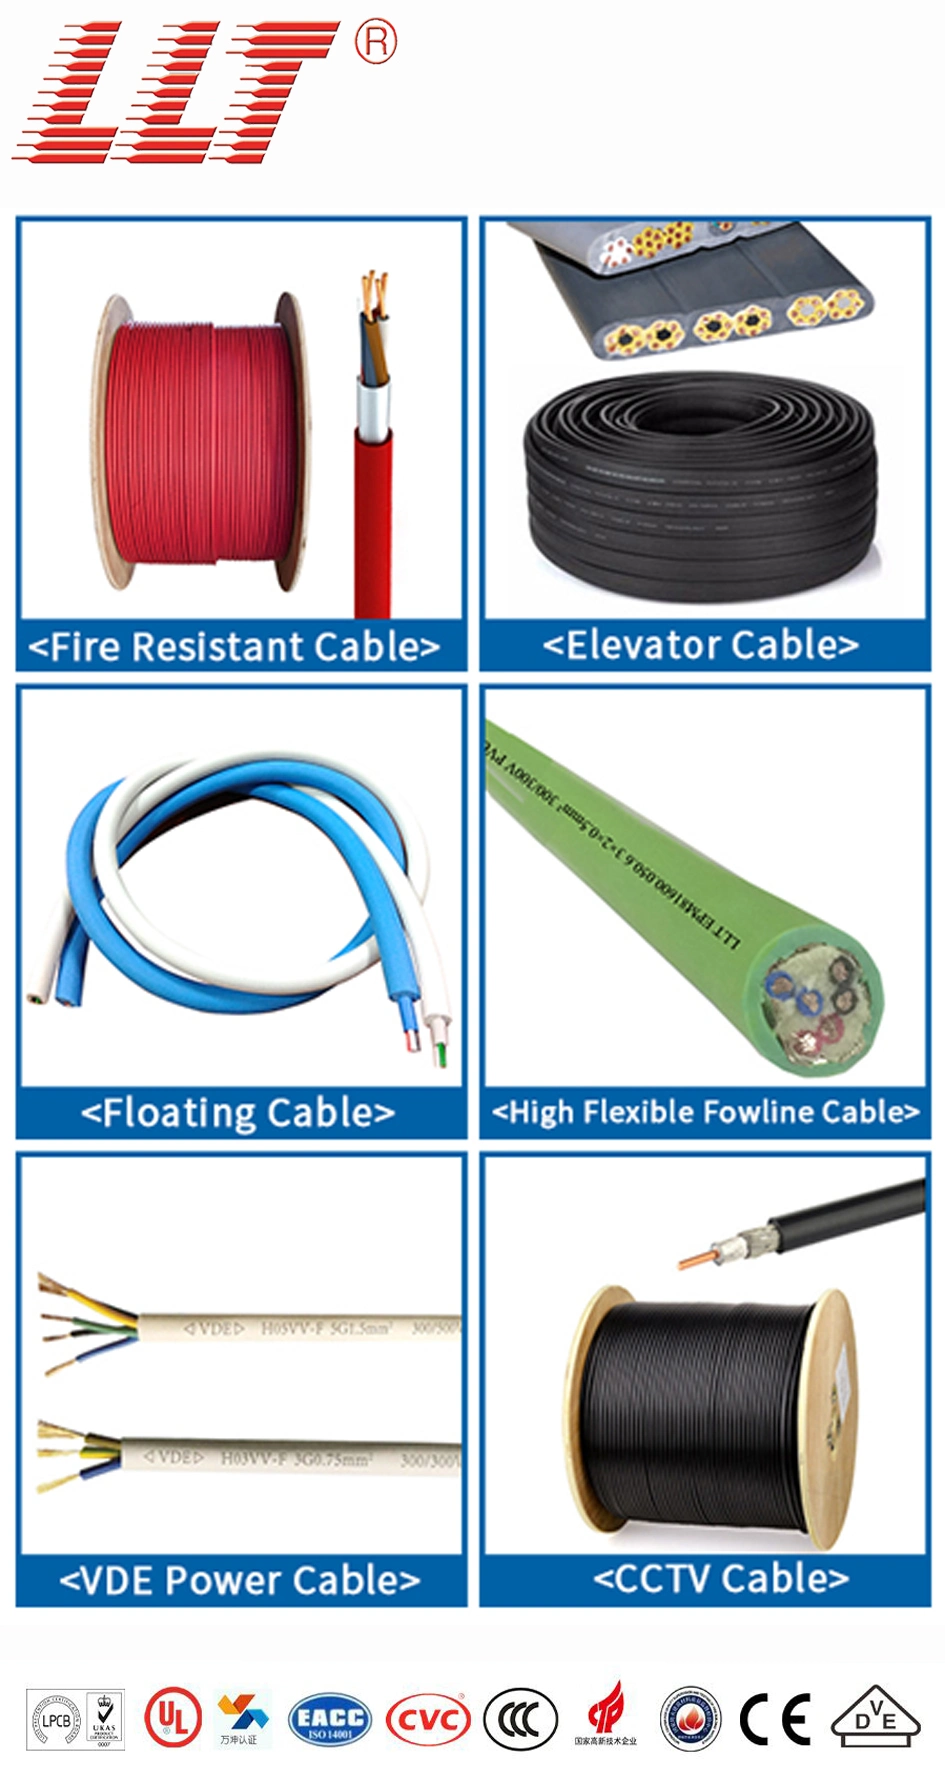 Electric Wire Cable Building Copper Wire Silicone Rubber Jacket UL Approved Fire Alarm Cable for Fire Alarm System Security Alarm Systems Smoke Detector Control